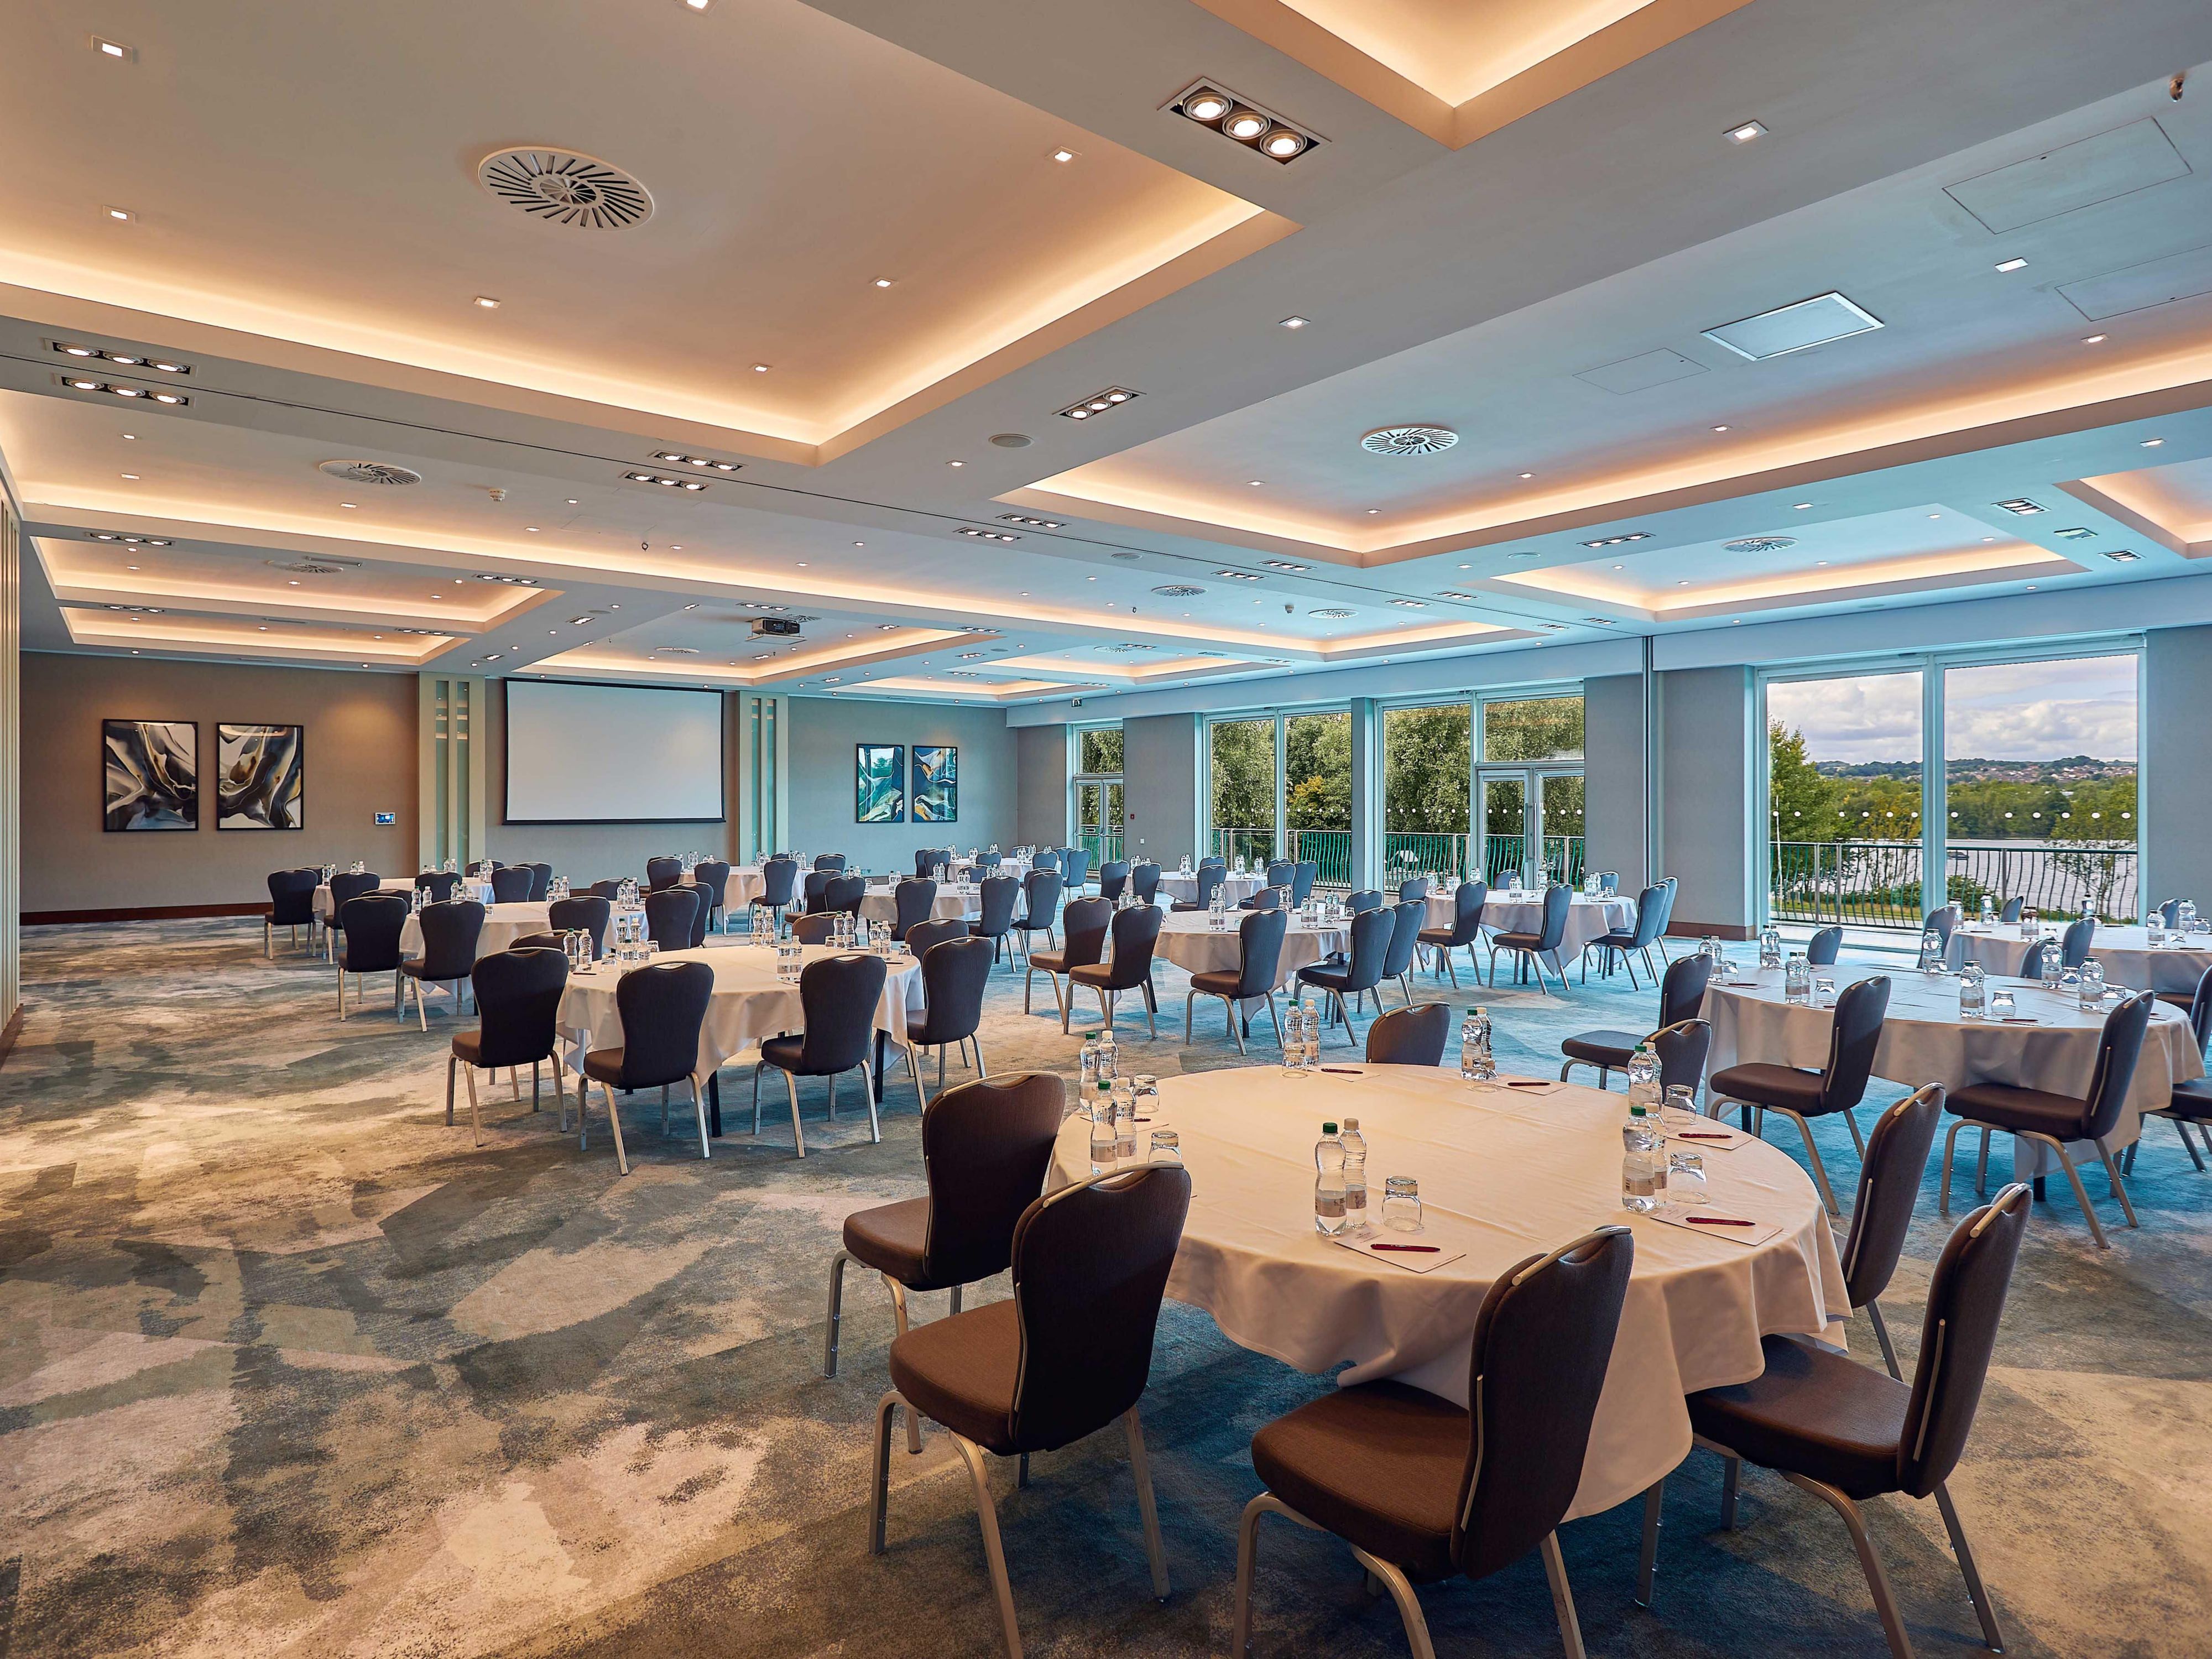 Crowne Plaza Marlow offers unique facilities ideal for corporate entertaining, meetings for up to 450 delegates and team building. Our purpose built conference suite incorporates 8 highly modern meeting rooms with exclusive break out areas.